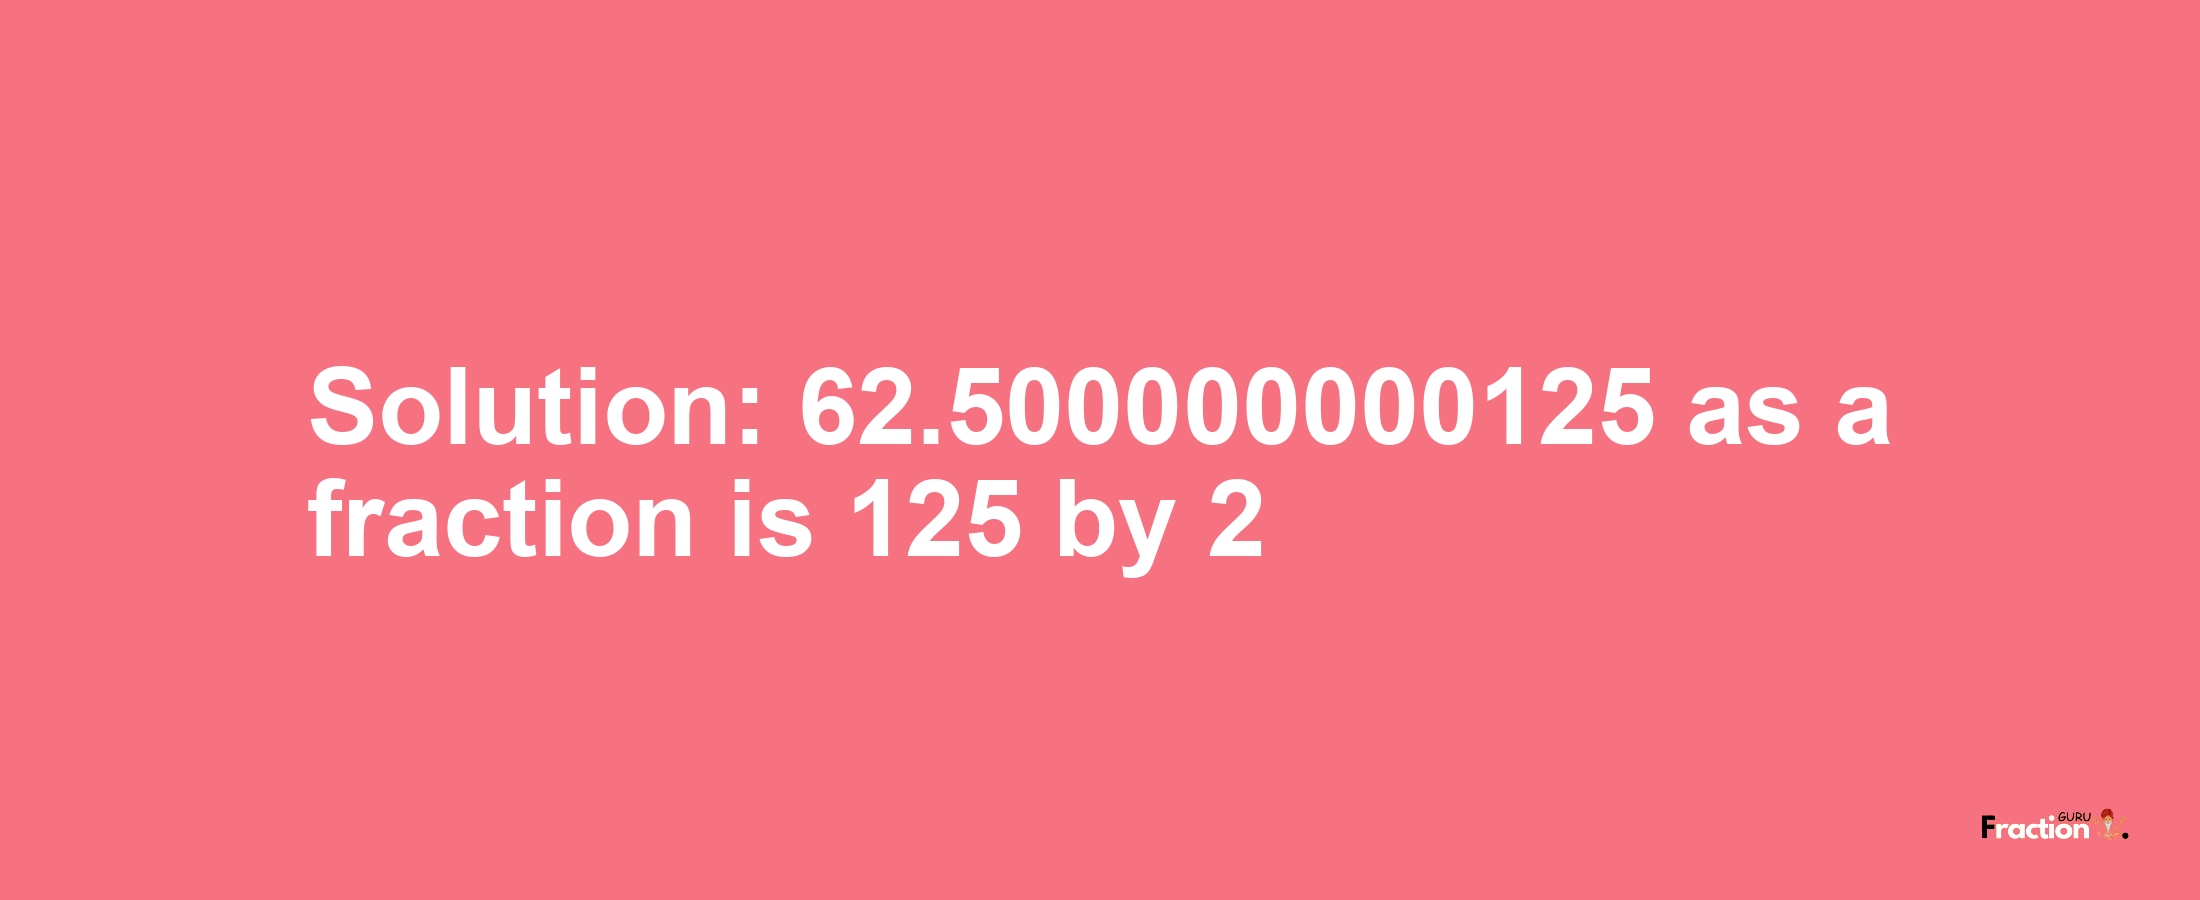 Solution:62.500000000125 as a fraction is 125/2